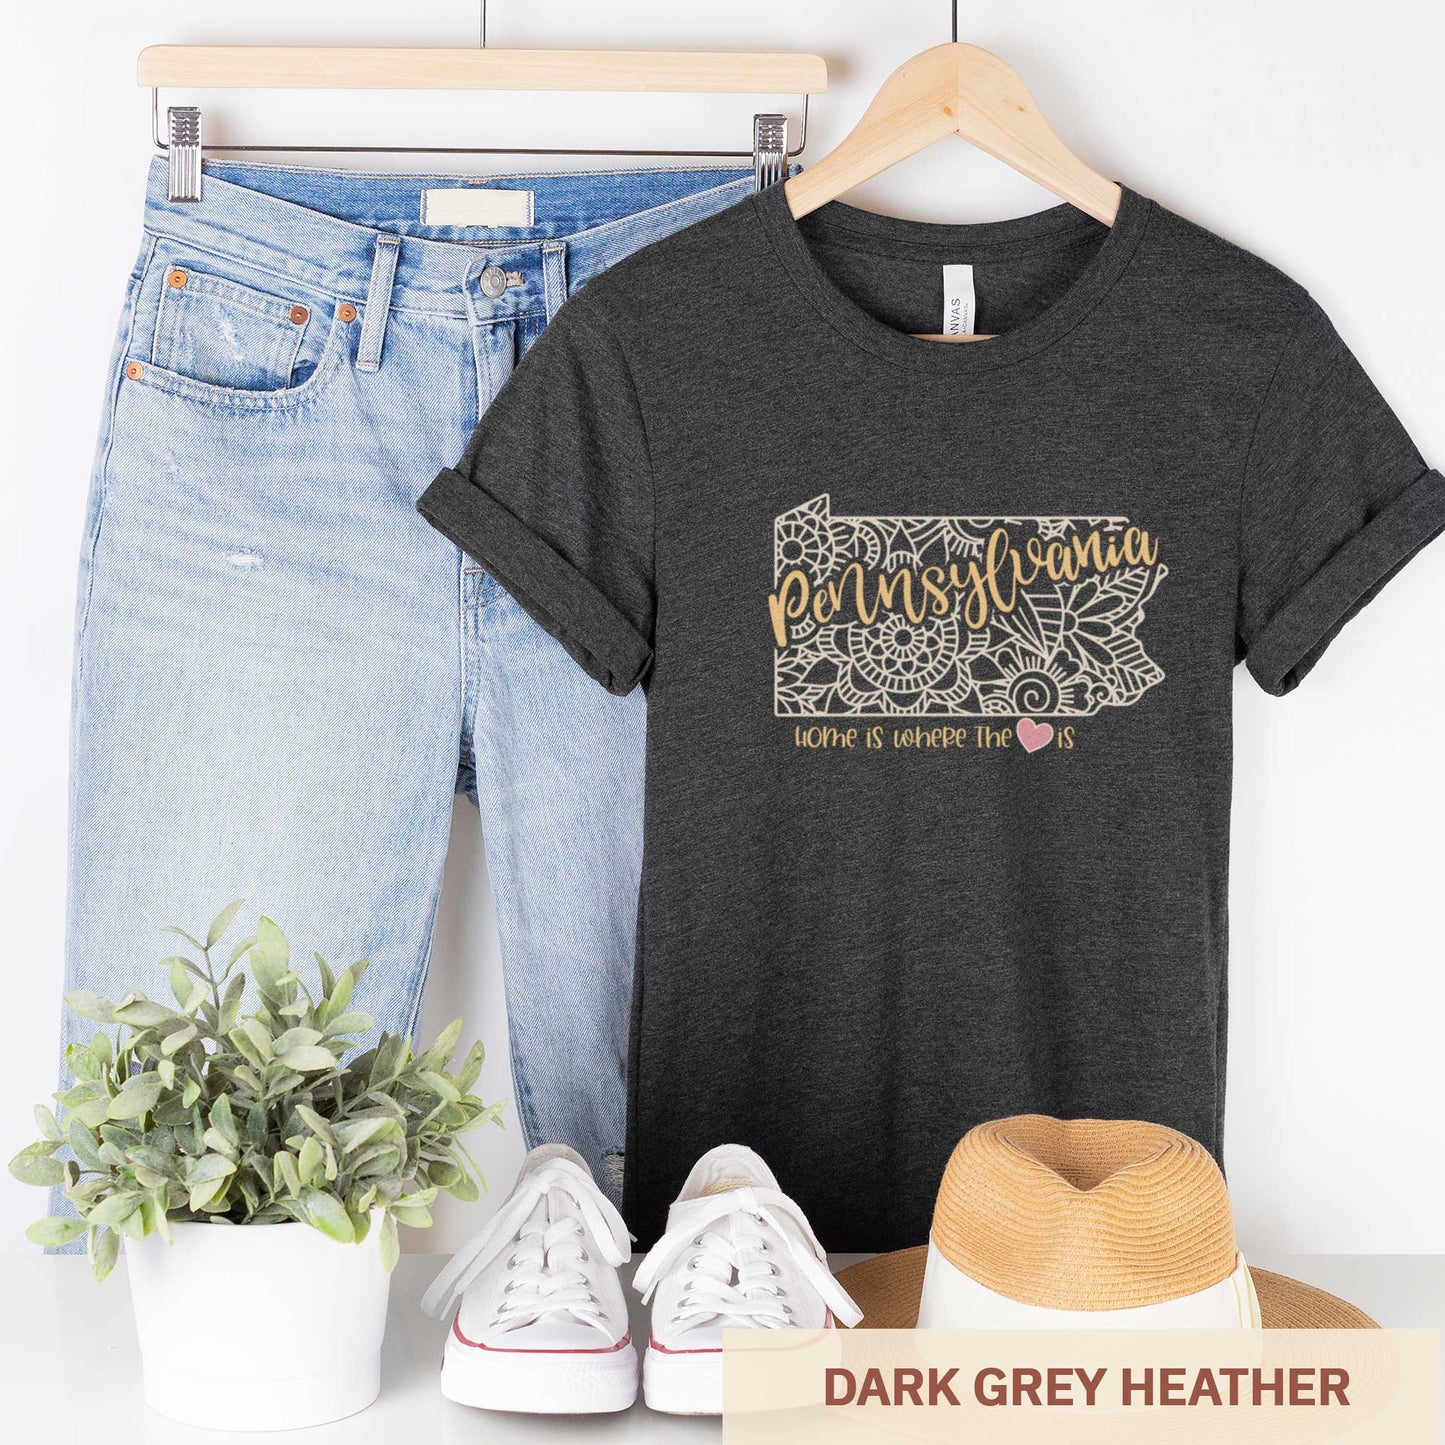 A hanging dark grey heather Bella Canvas t-shirt featuring a mandala in the shape of Pennsylvania with the words home is where the heart is.